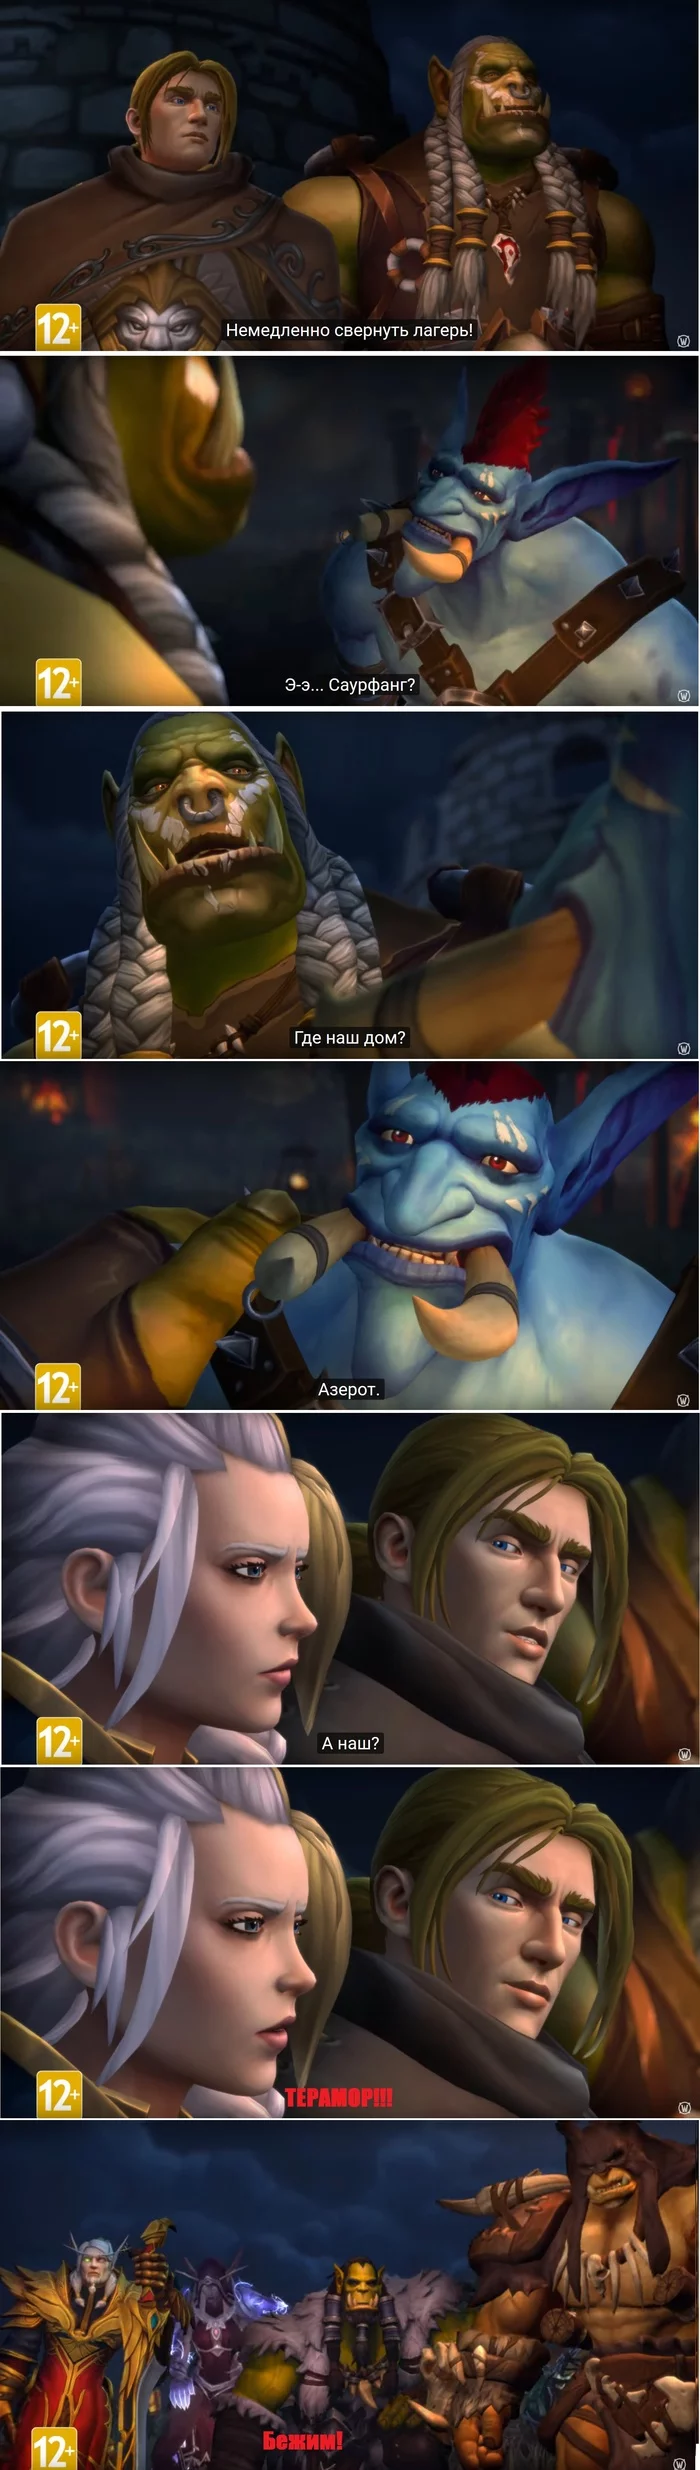 How the Diplomacy in-game cutscene should have ended - My, Warcraft, Wow, Blizzard, Jaina Proudmoore, Varok Saurfang, Anduin Rinn, Paint master, Author's comic, Longpost